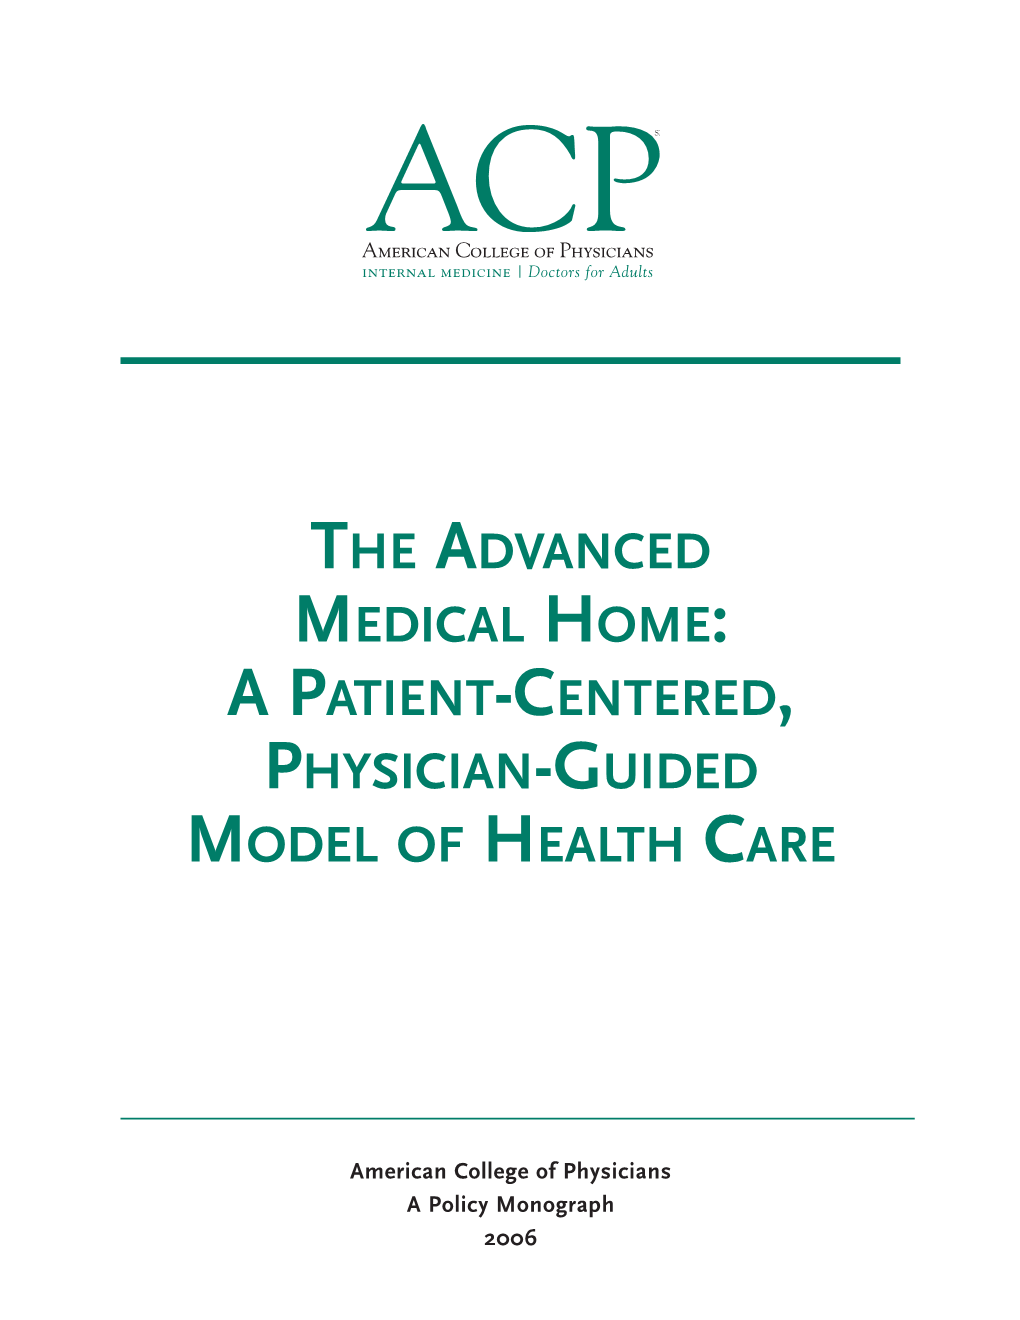 The Advanced Medical Home: a Patient-Centered, Physician Guided